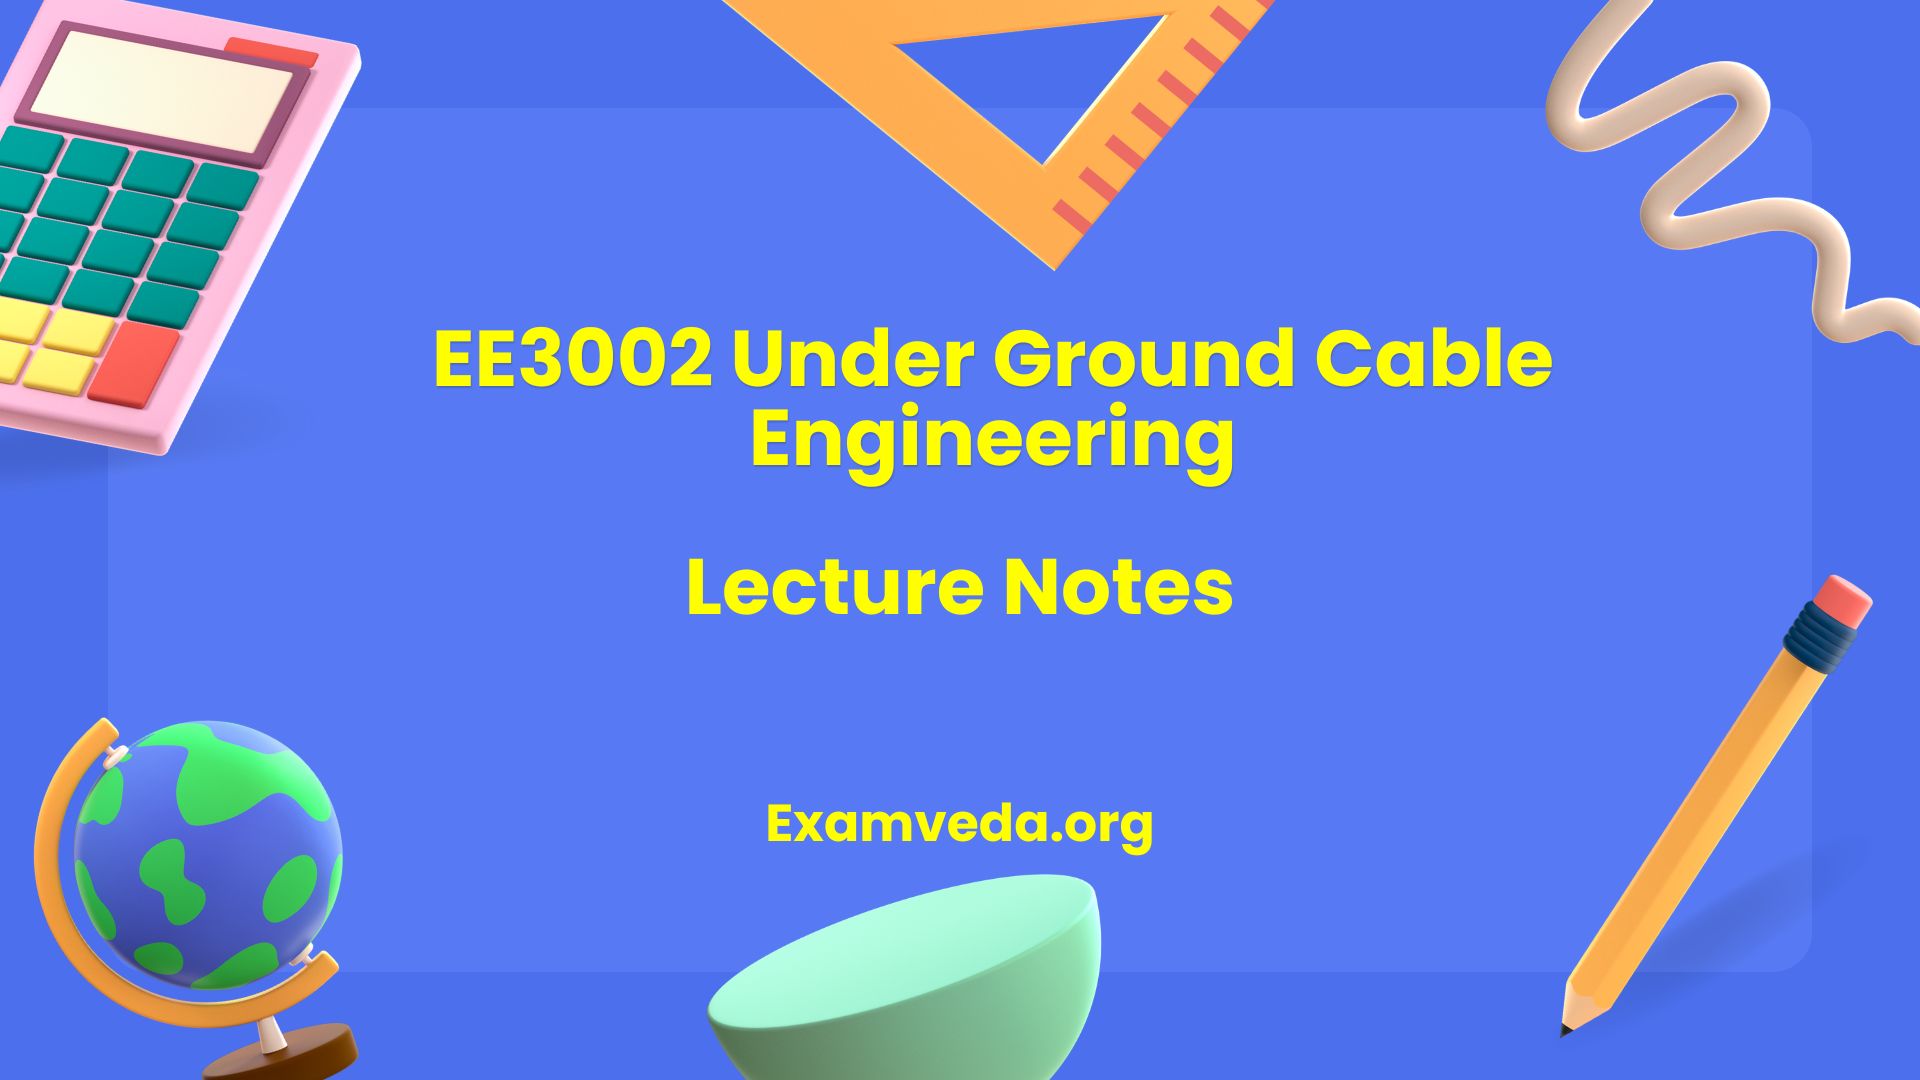 EE3002 Under Ground Cable Engineering Lecture Notes